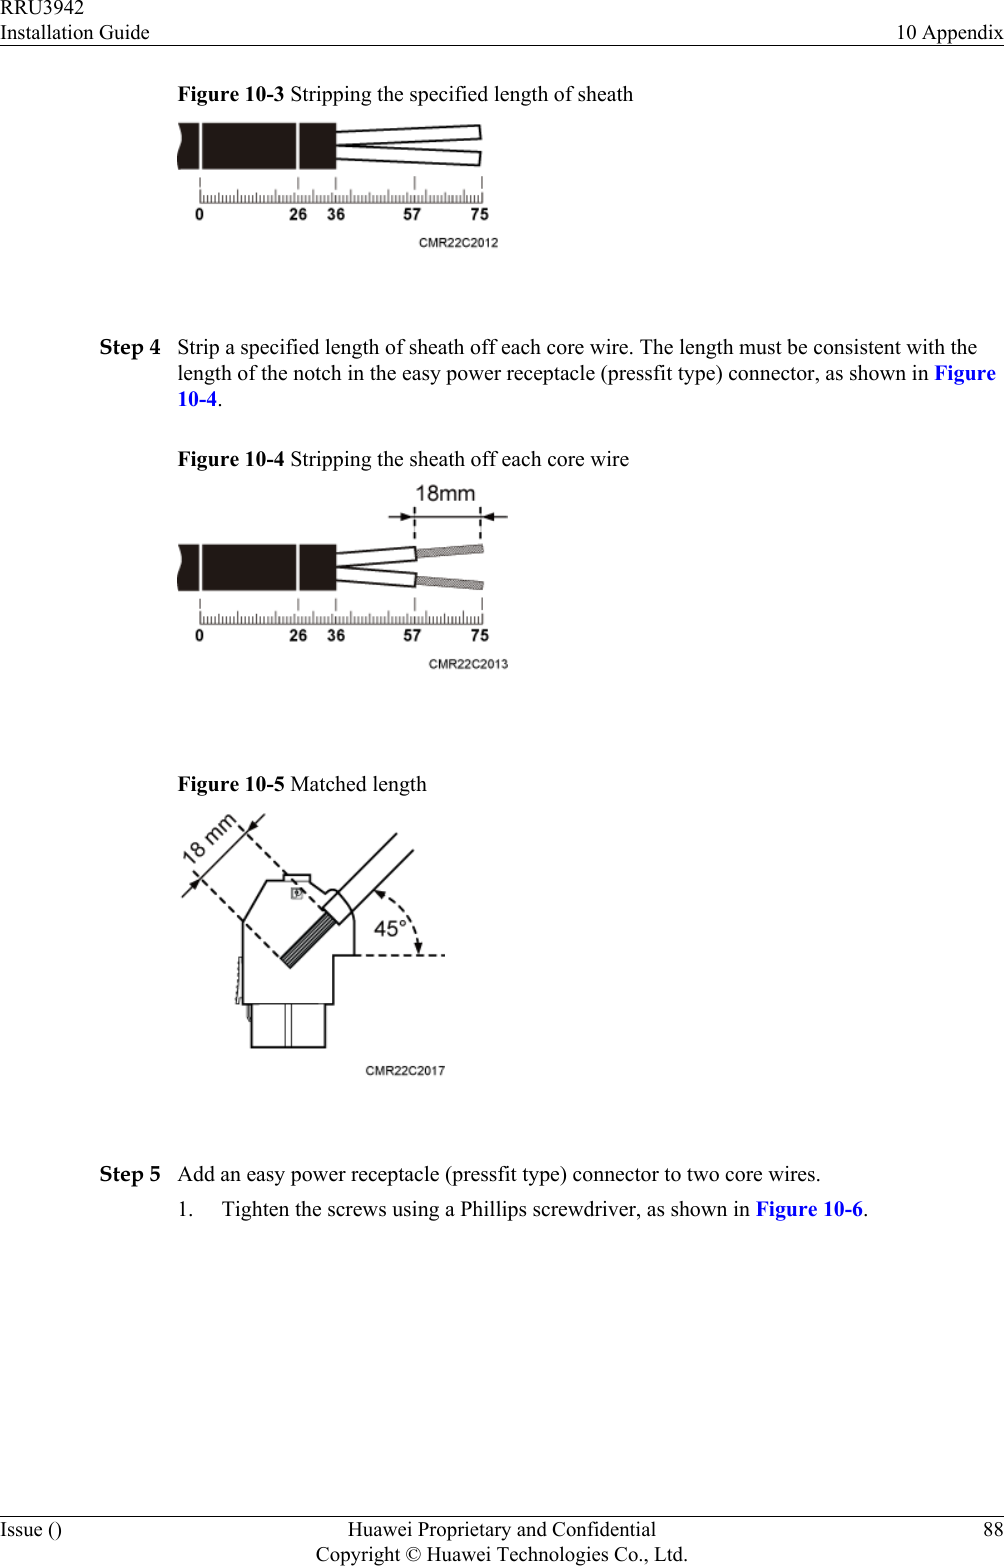 Figure 10-3 Stripping the specified length of sheath Step 4 Strip a specified length of sheath off each core wire. The length must be consistent with thelength of the notch in the easy power receptacle (pressfit type) connector, as shown in Figure10-4.Figure 10-4 Stripping the sheath off each core wire Figure 10-5 Matched length Step 5 Add an easy power receptacle (pressfit type) connector to two core wires.1. Tighten the screws using a Phillips screwdriver, as shown in Figure 10-6.RRU3942Installation Guide 10 AppendixIssue () Huawei Proprietary and ConfidentialCopyright © Huawei Technologies Co., Ltd.88